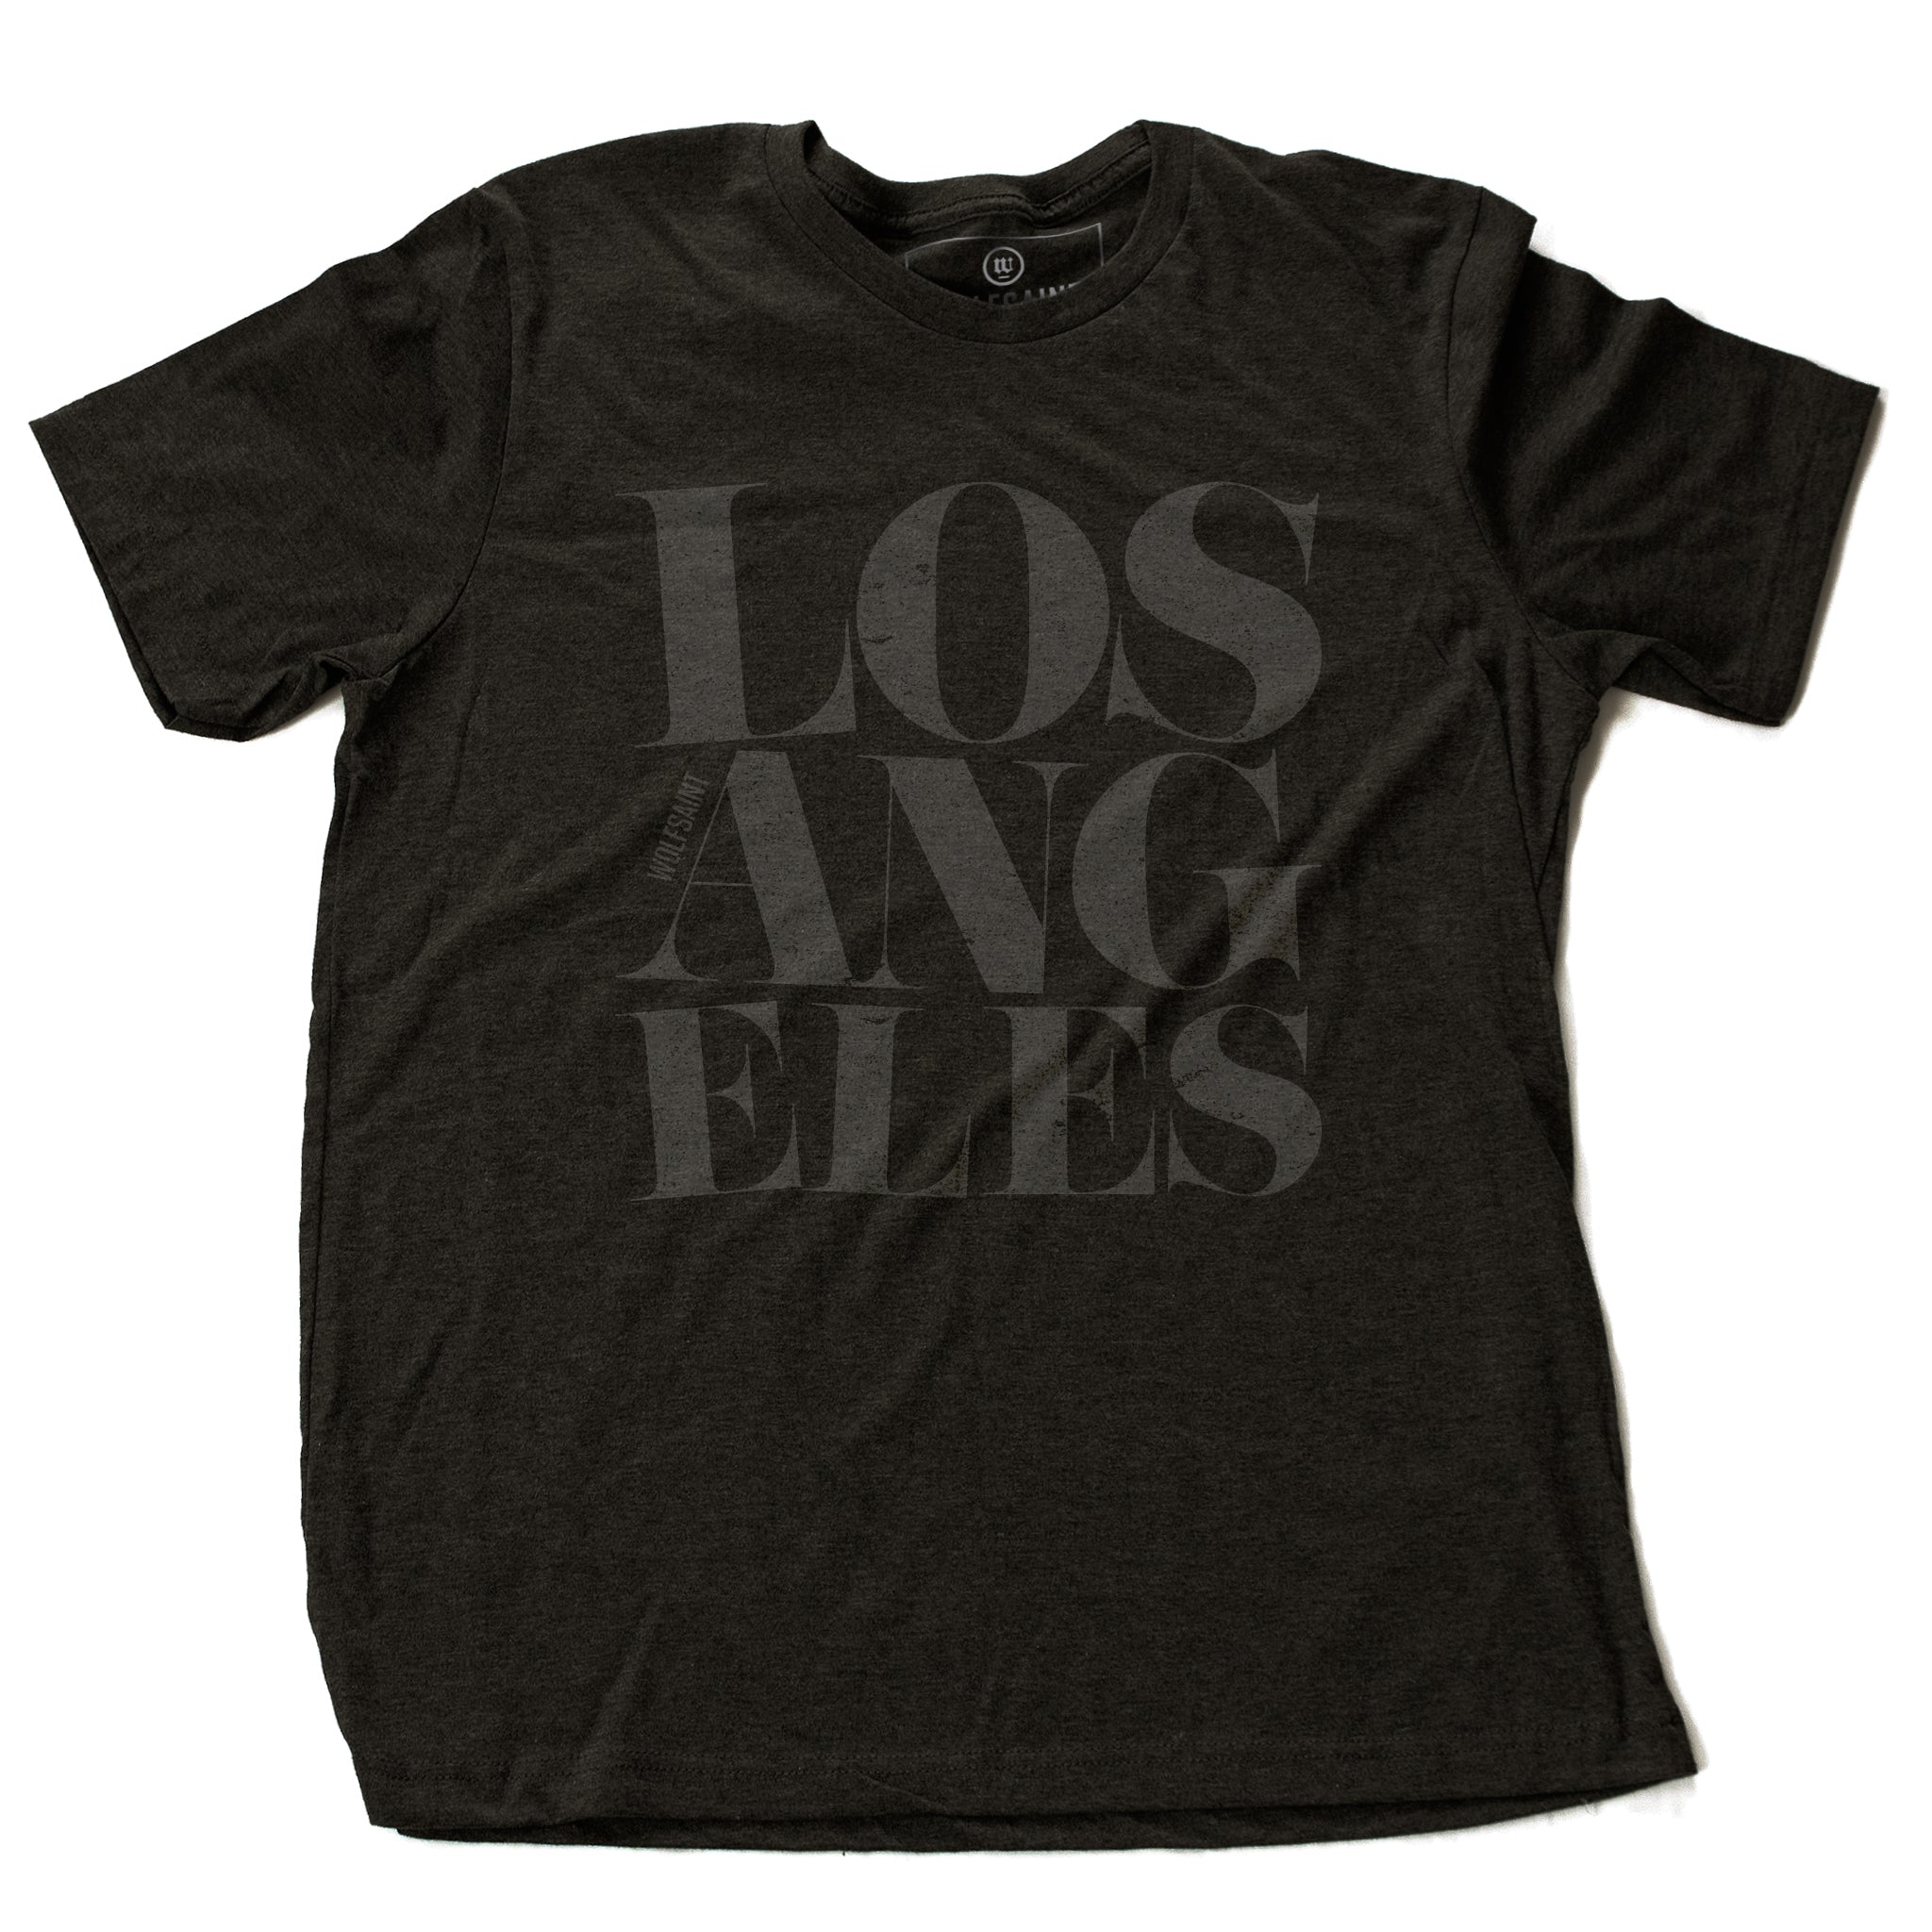 A fashionable Dark Gray Heather graphic t-shirt featuring the word “LOS ANGELES” in a elegant font, stacked in three tilted lines to sarcastically simulate an earthquake. From wolfsaint.net